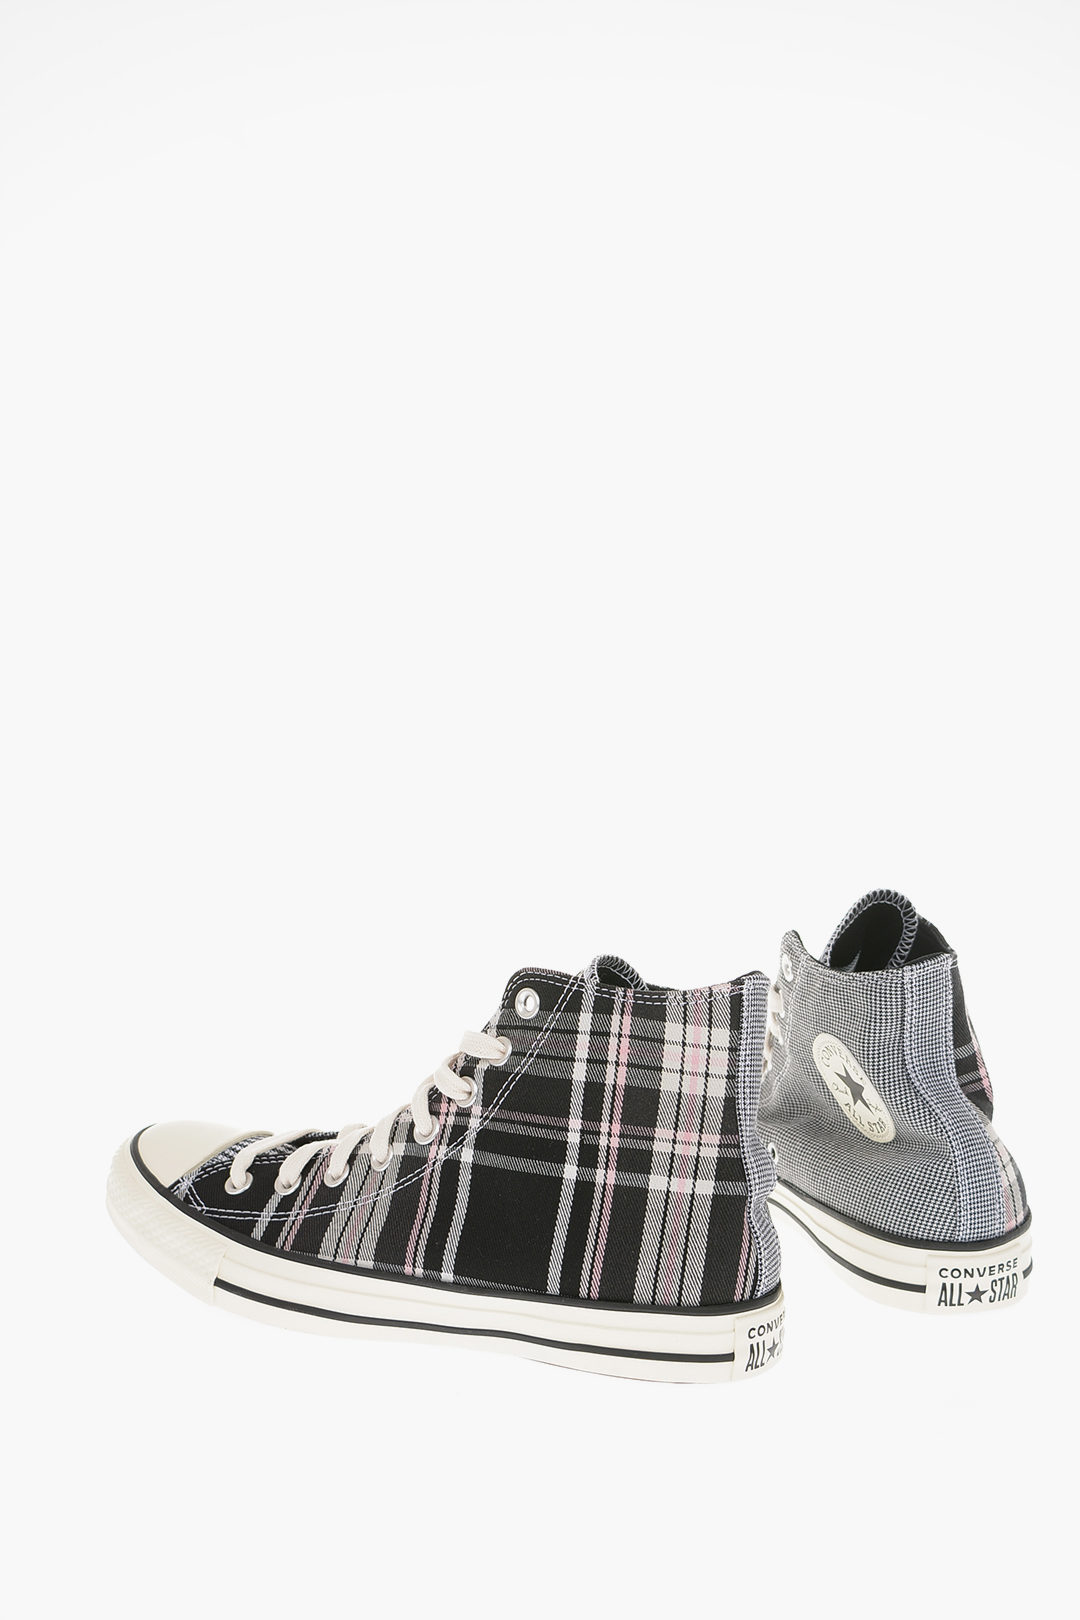 CHUCK TAYLOR ALL STAR Houndstooth and Tartan Check High-top Sneakers افضل توصيلة كهرباء